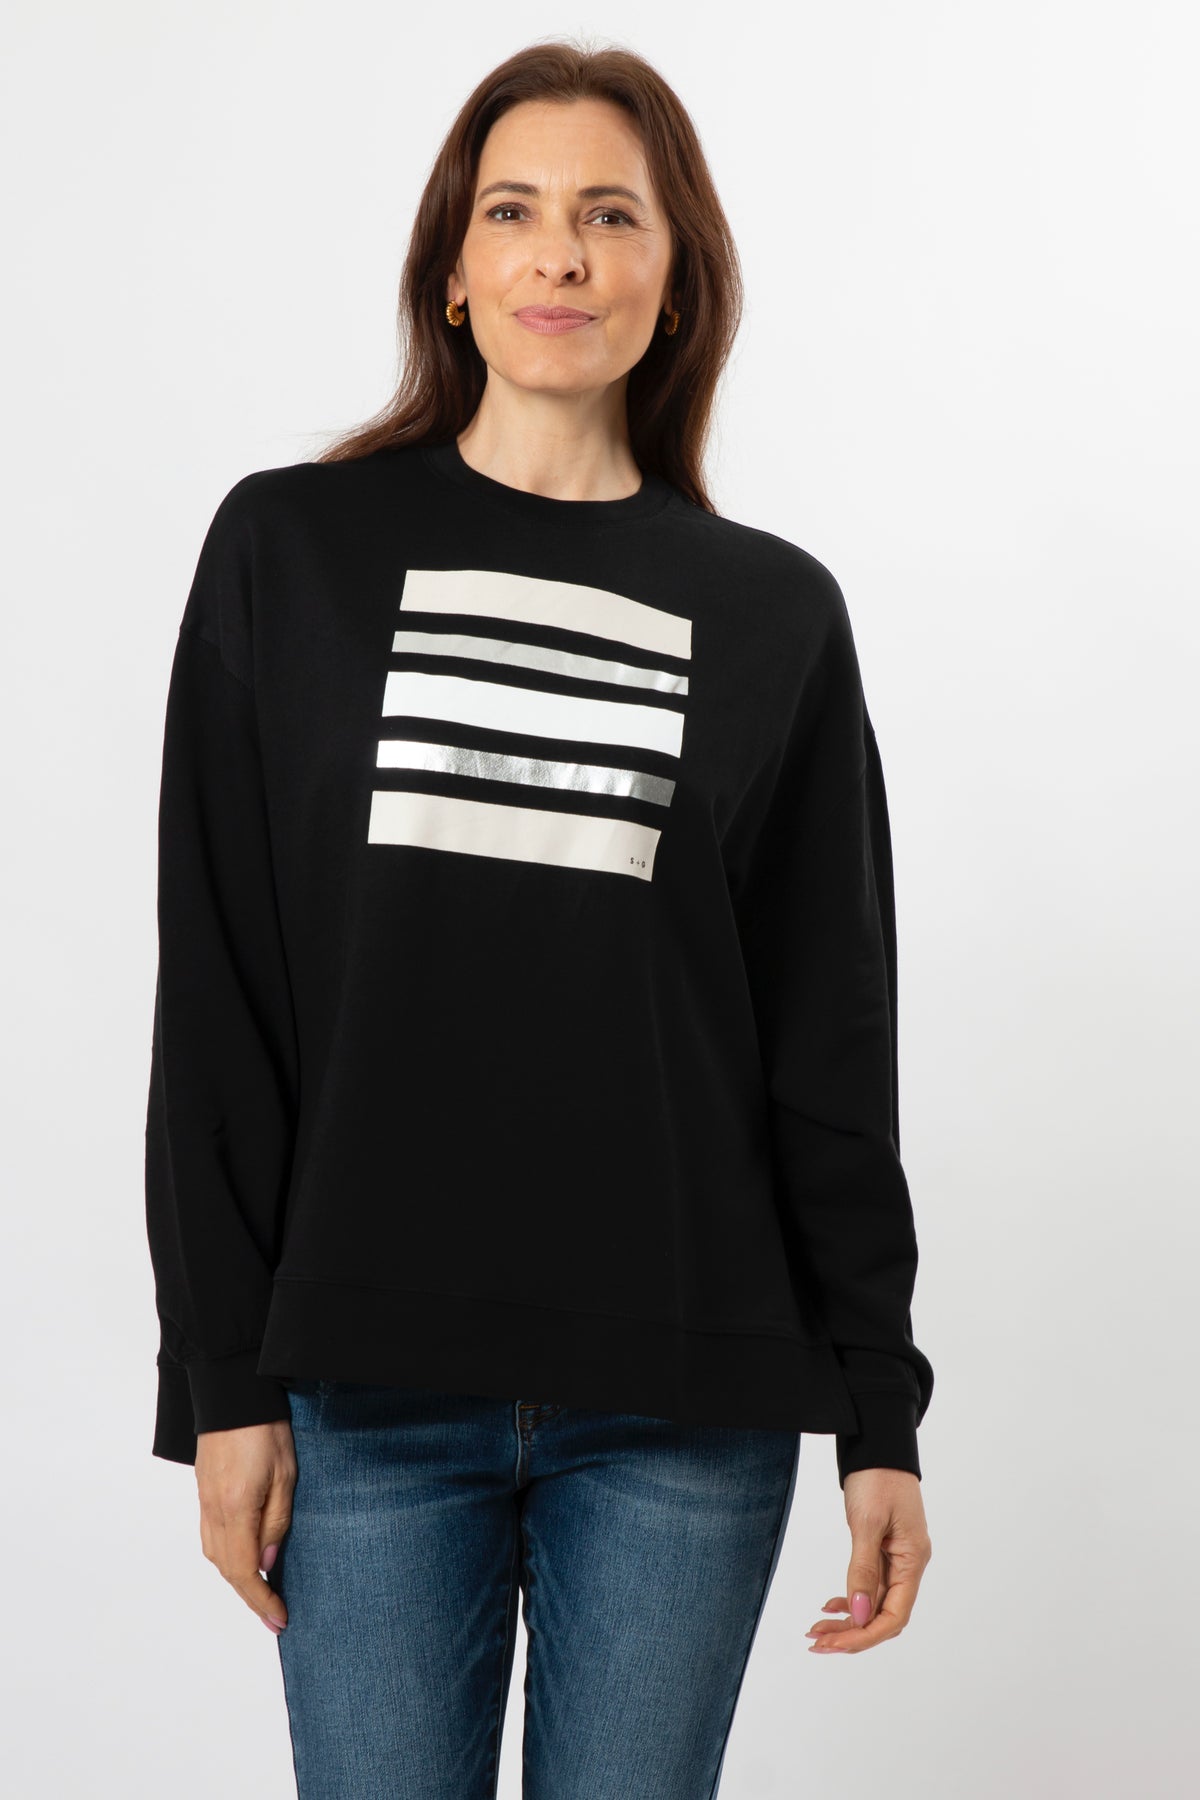 Sunday Sweater Black Licorice Allsorts - PREORDER DELIVERY END APRIL (Copy) (Copy)